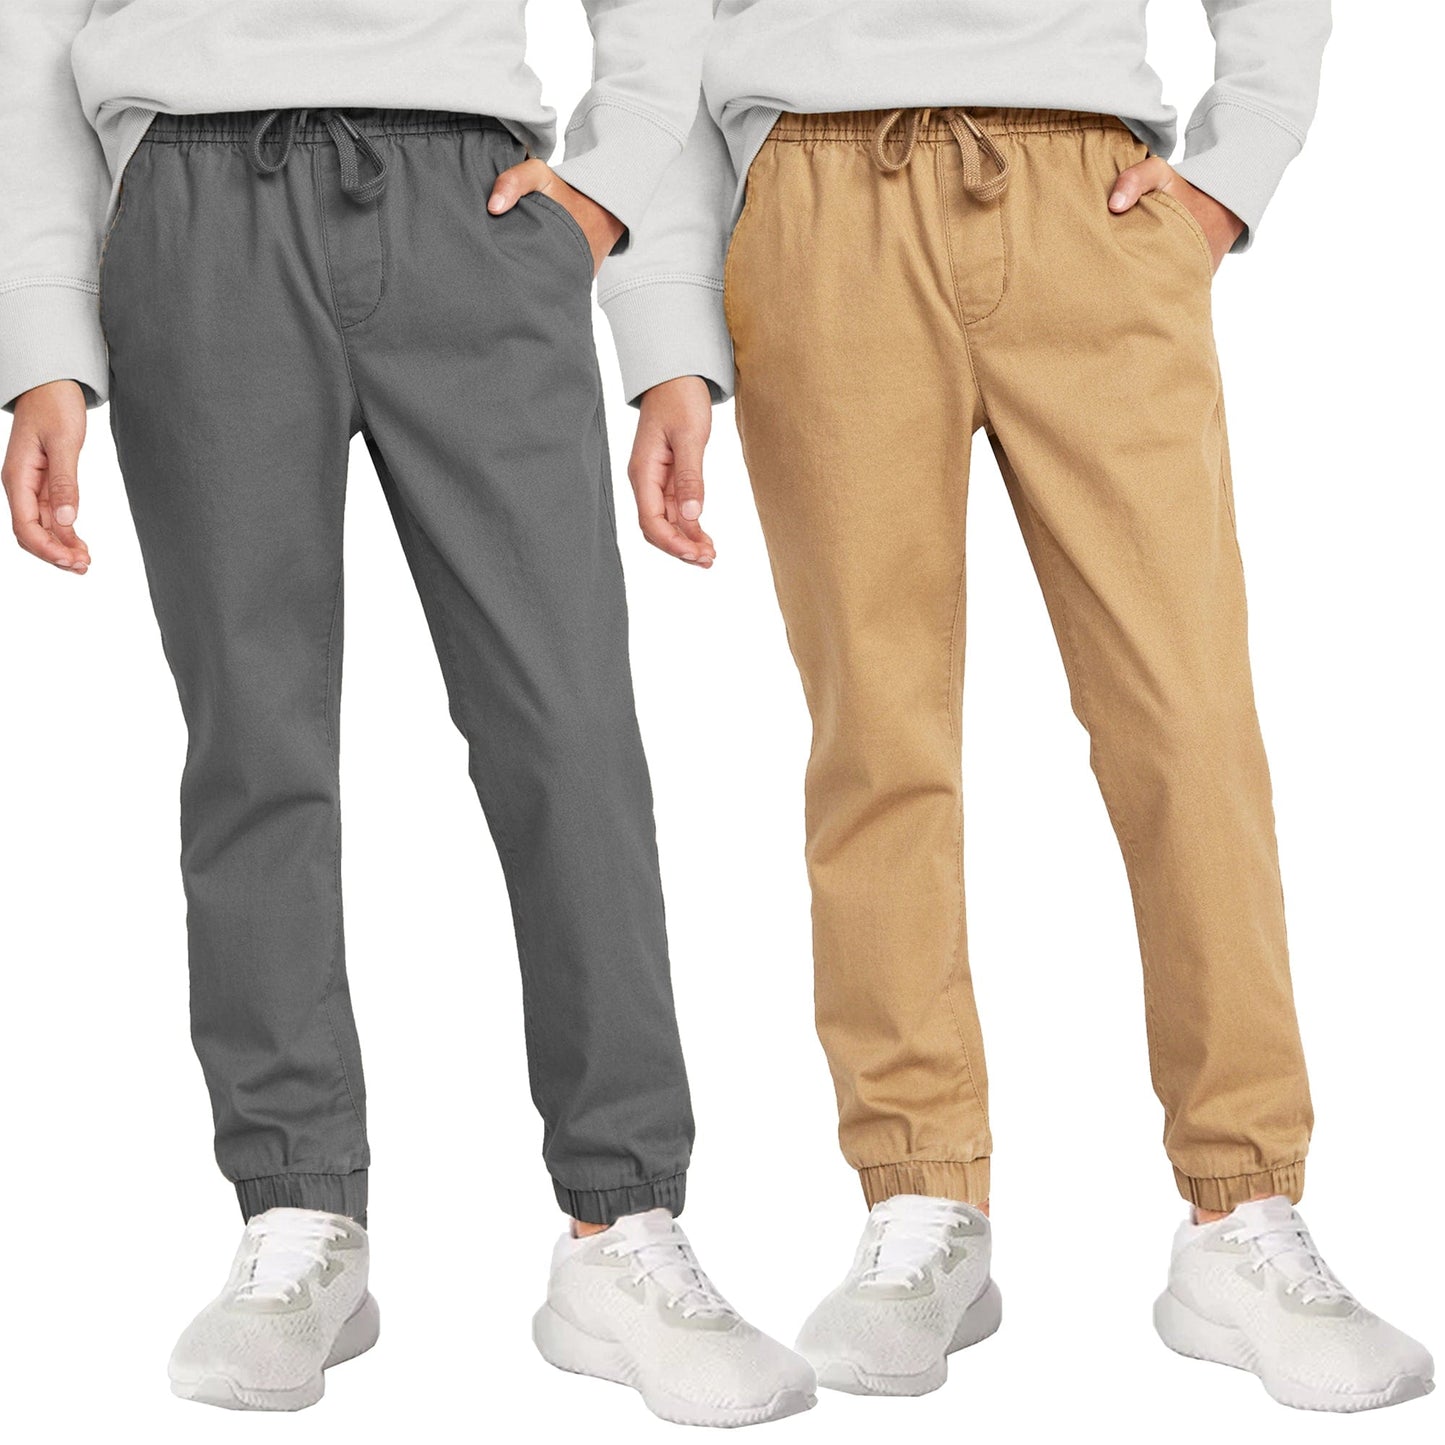 2-Pack Boy's Slim Fitting Cotton Stretch Classic Twill Joggers - GalaxybyHarvic